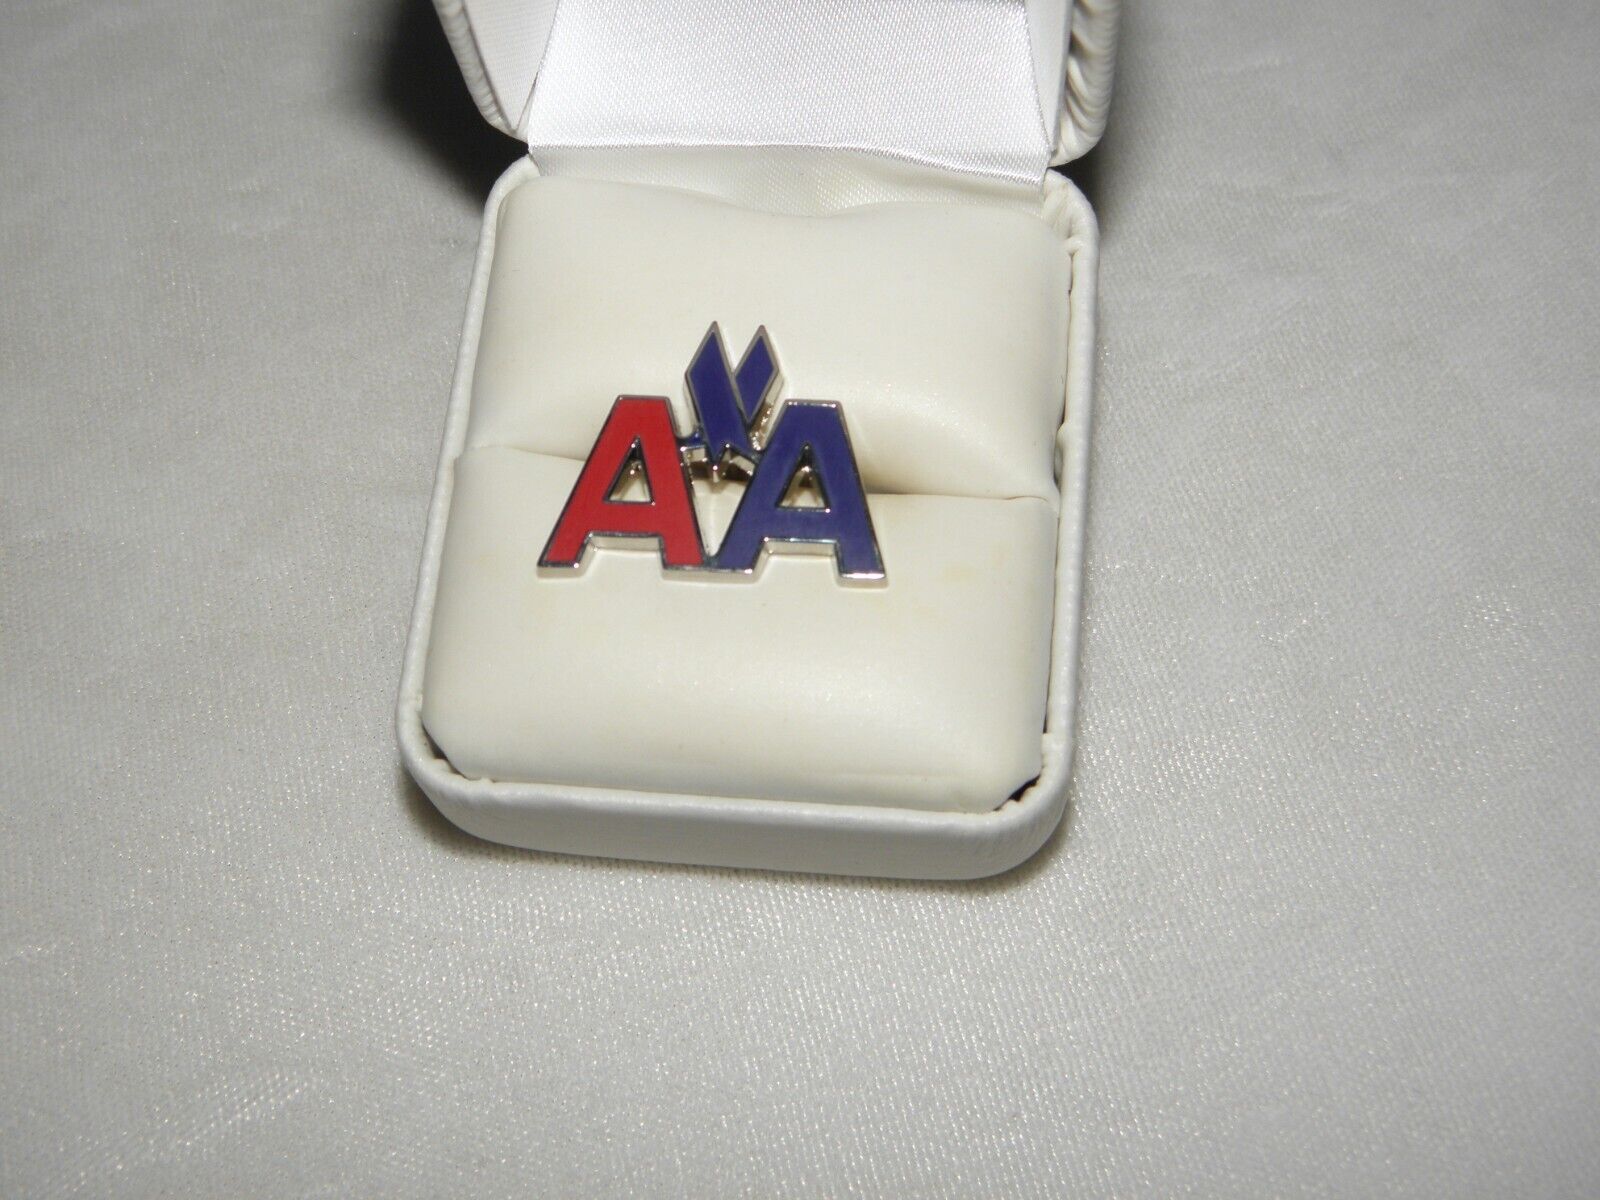 AMERICAN AIRLINES PIN CLASSIC AA CUT OUT LOGO LAPEL TAC PIN PILOT GIFT NEW